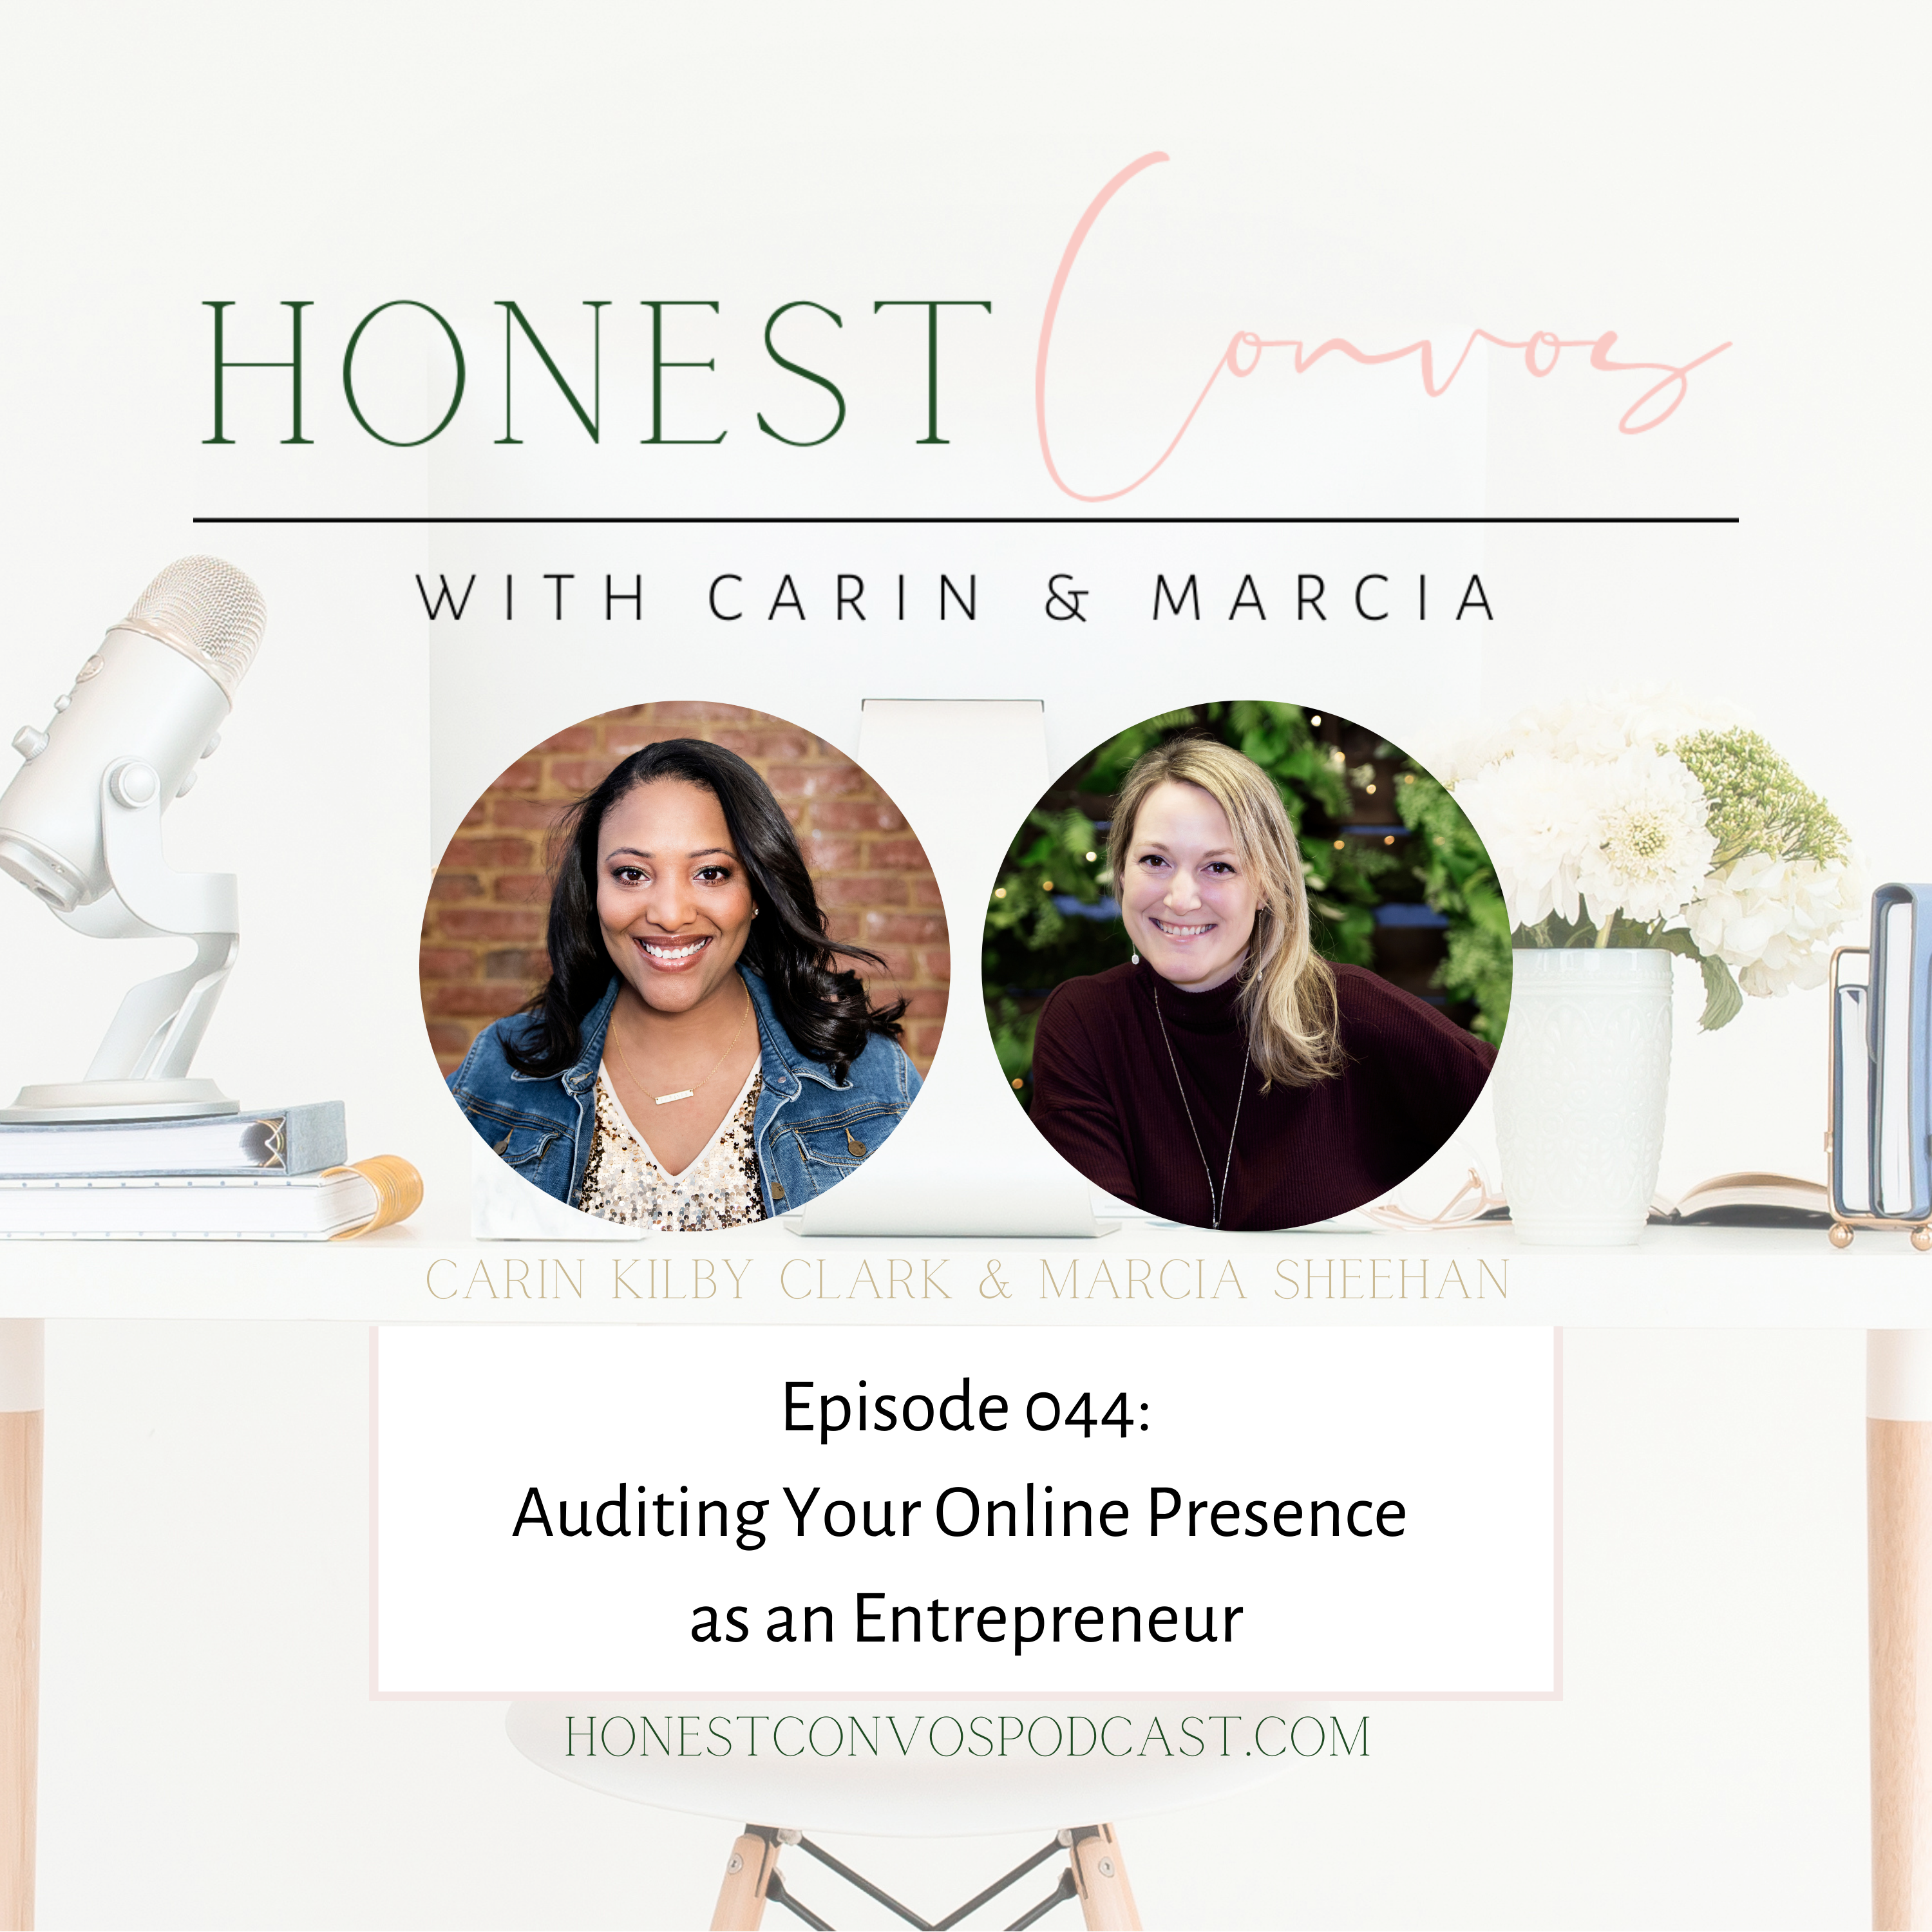 Auditing Your Online Presence as an Entrepreneur